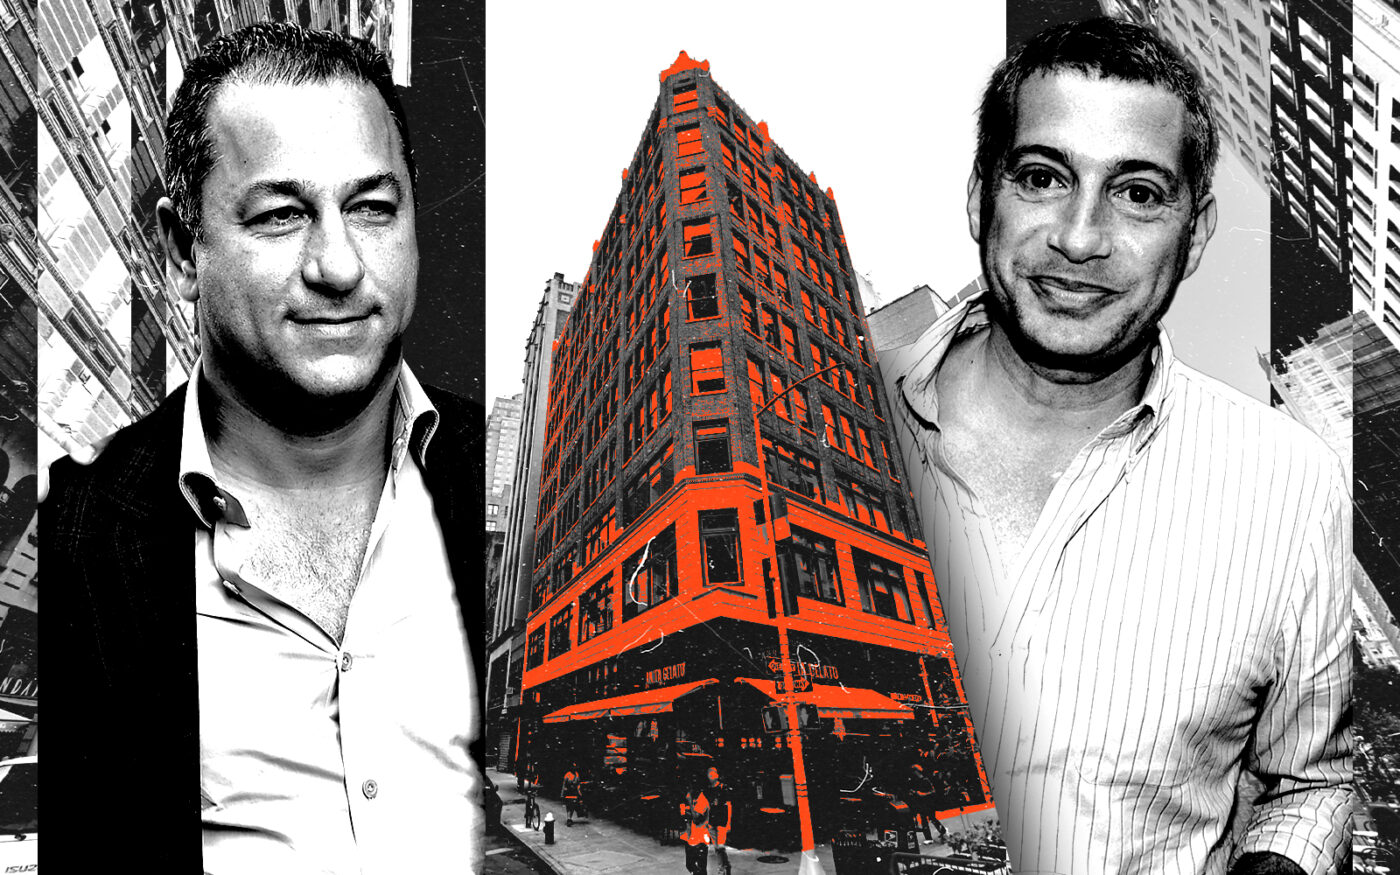 From left: Premier Equities' Yaron Jacobi, Uzi-Ben Abraham and 1141 Broadway (Photo Illustration by Steven Dilakian for The Real Deal with Getty, Google Maps)